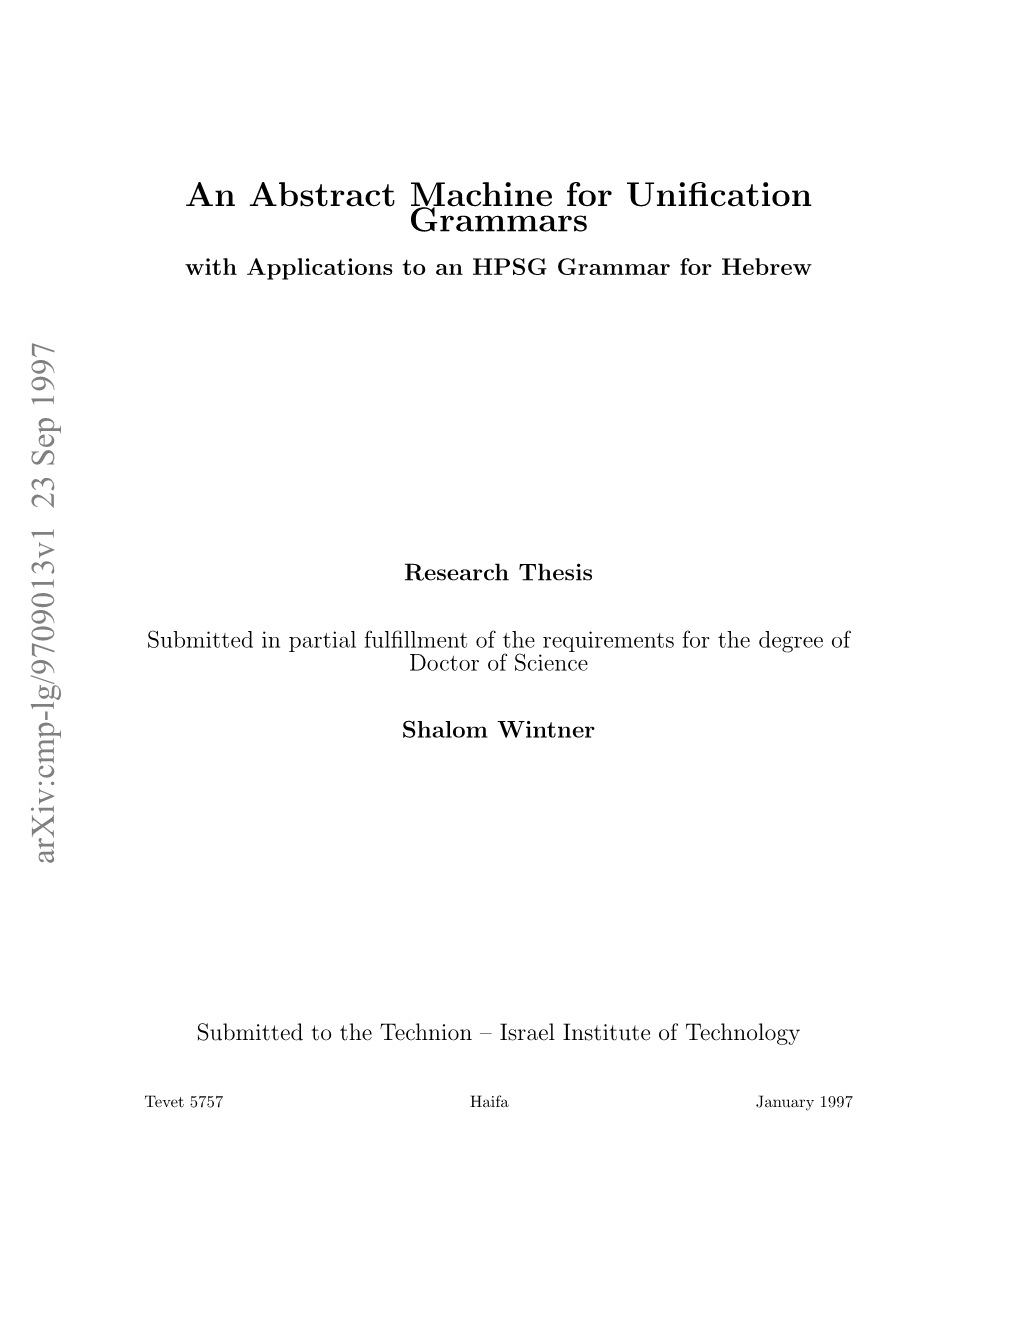 An Abstract Machine for Unification Grammars